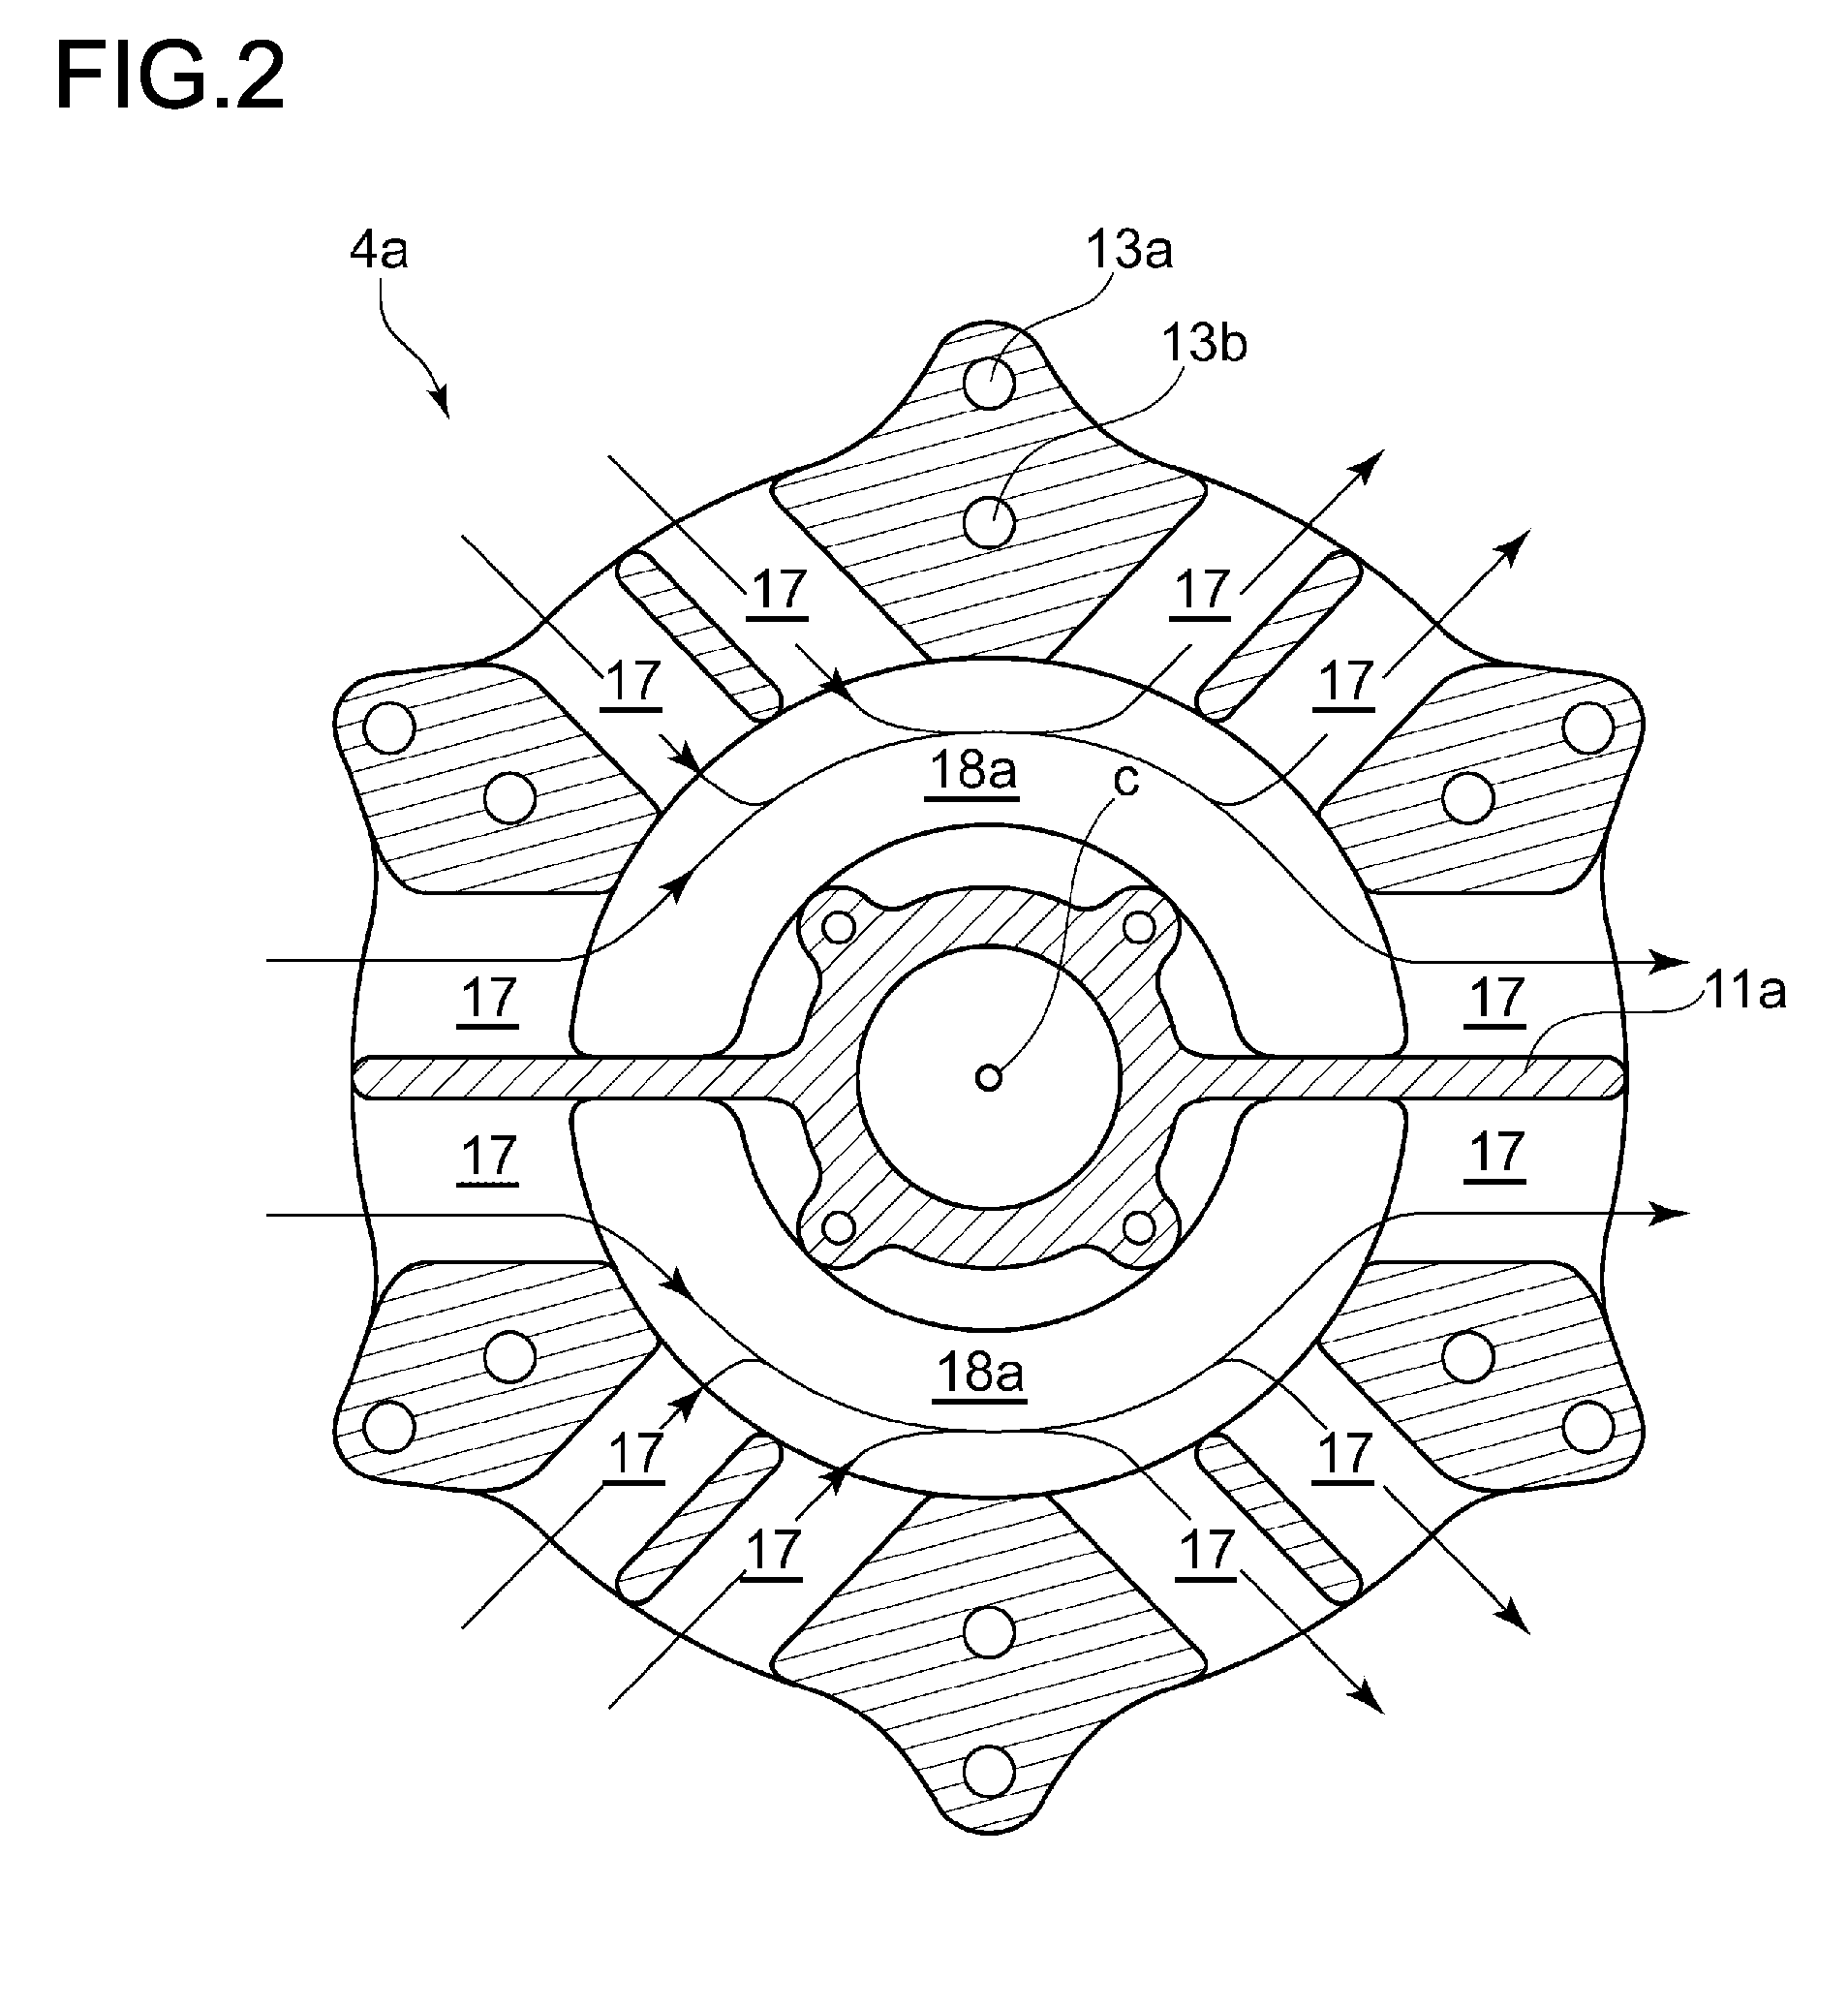 Supercharger with electric motor and engine device provided with supercharger with electric motor